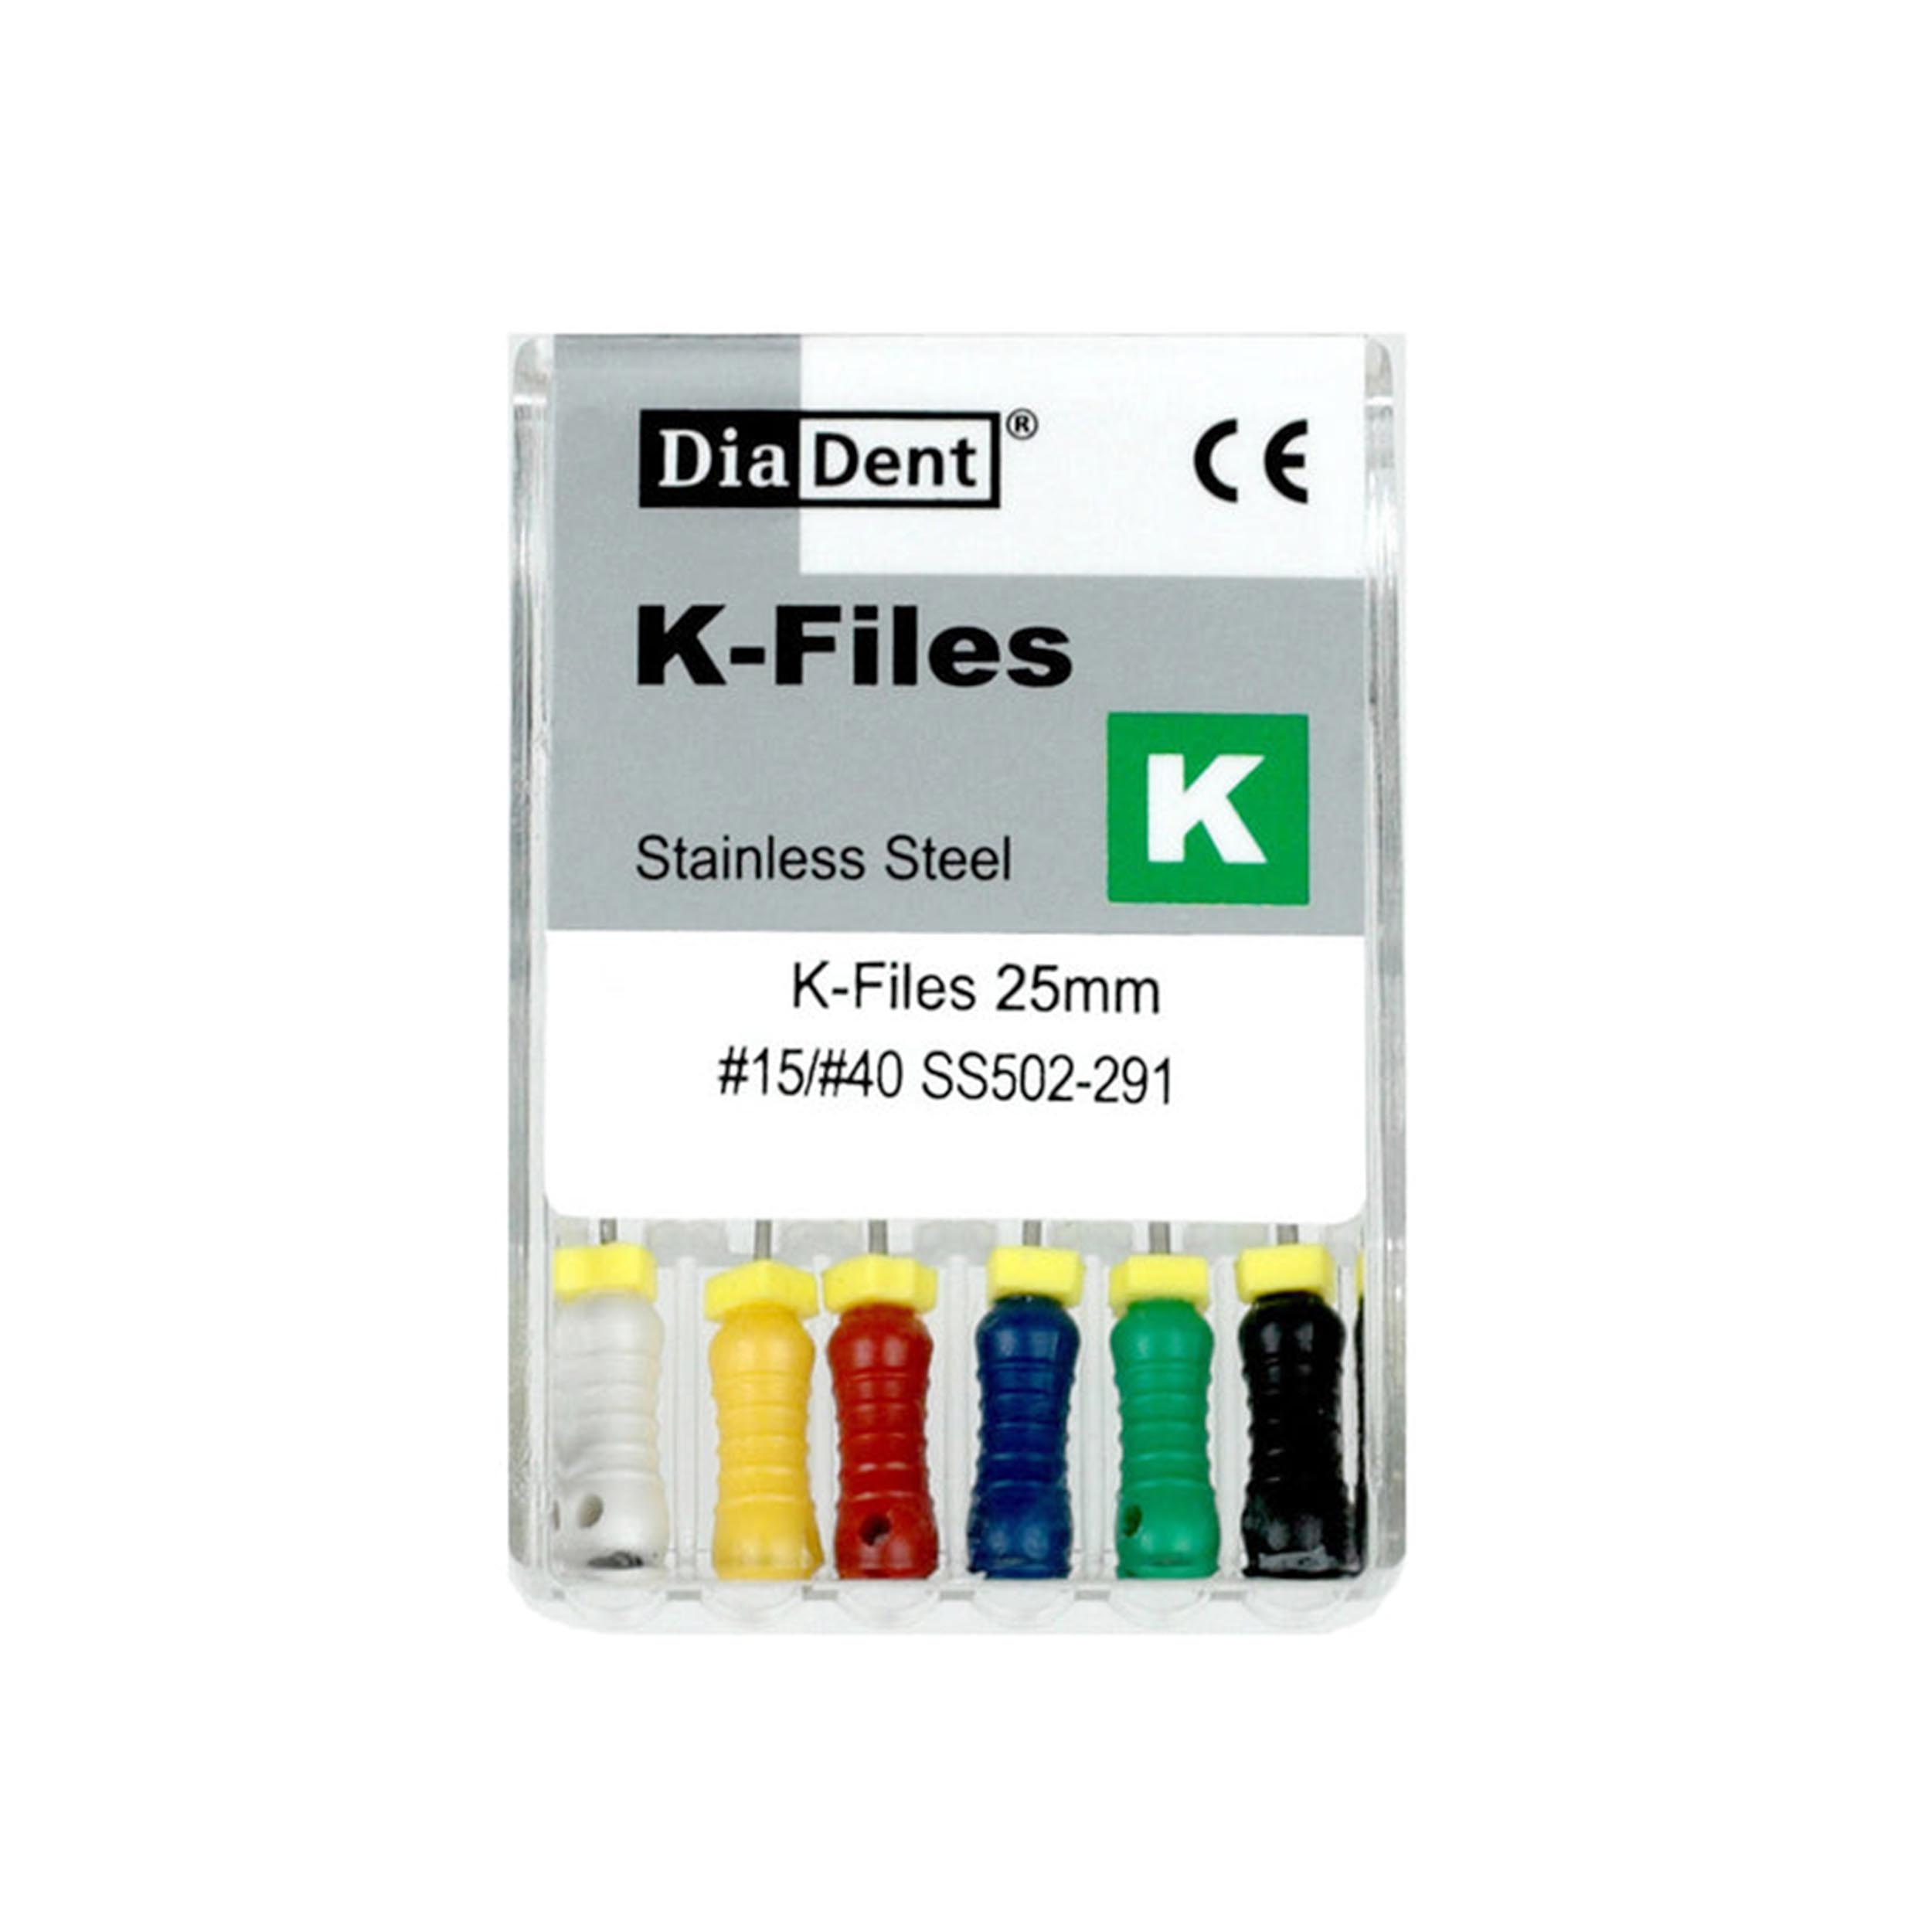 Diadent K File Stainless Steel File Pack of 6